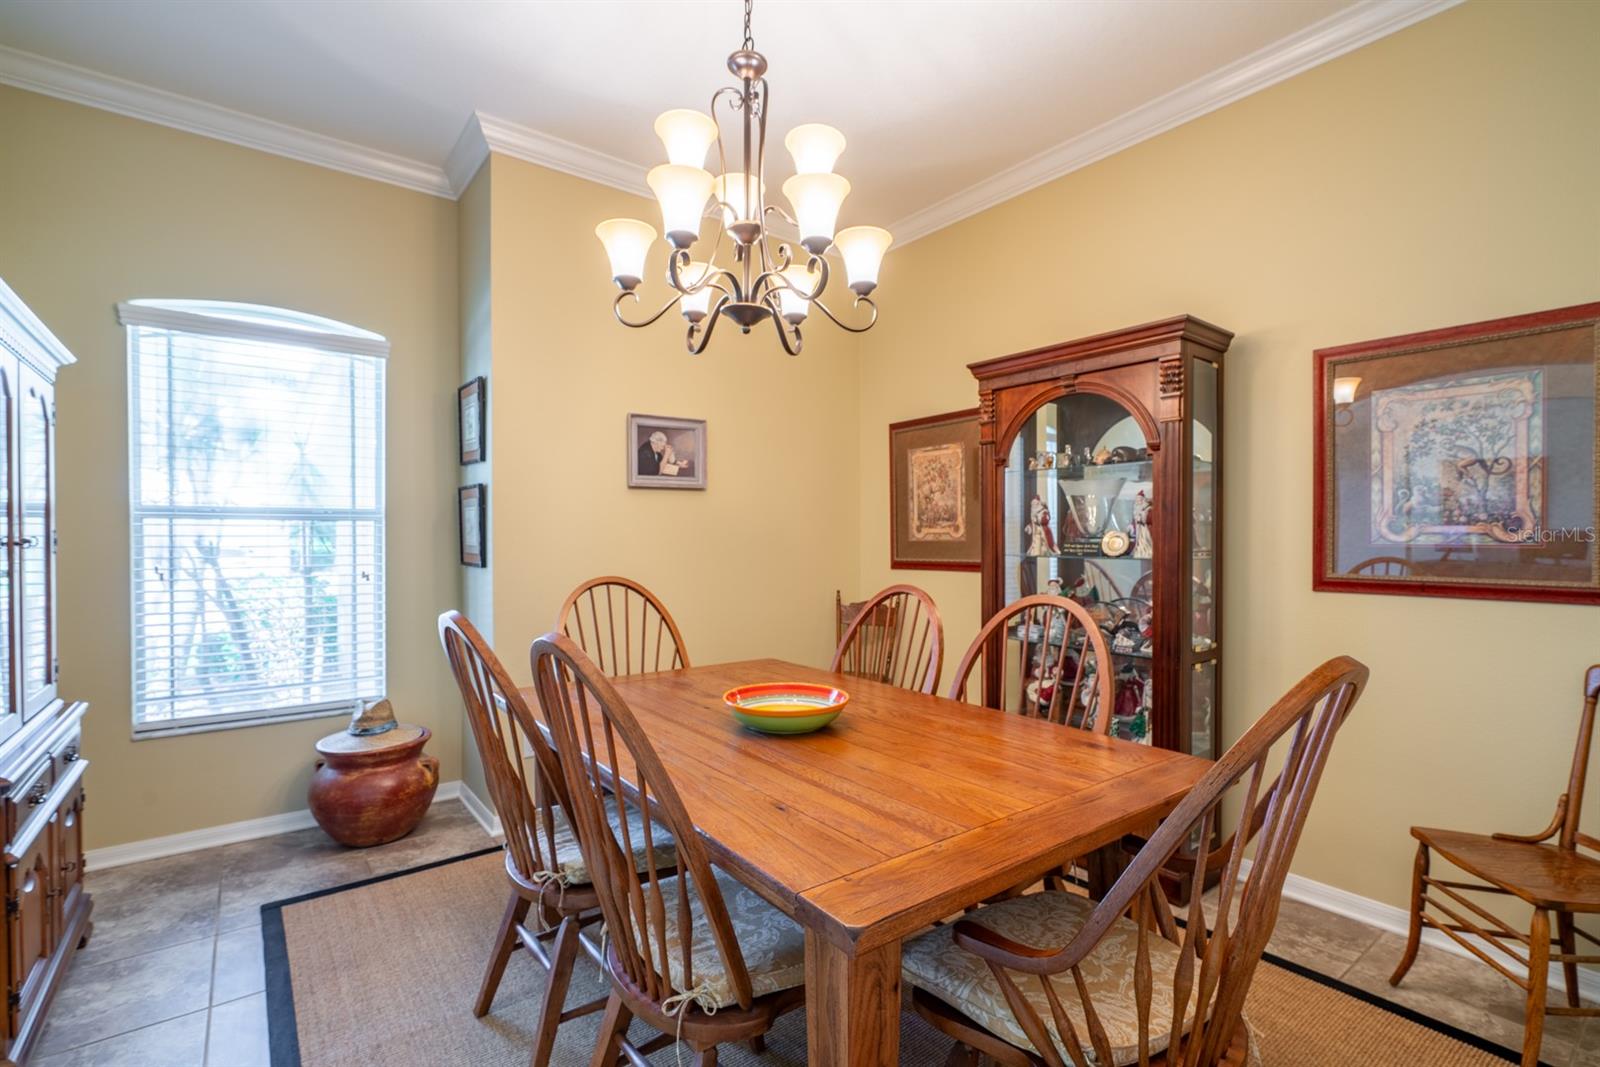 FORMAL DINING ROOM HAS CROWN MOLDING